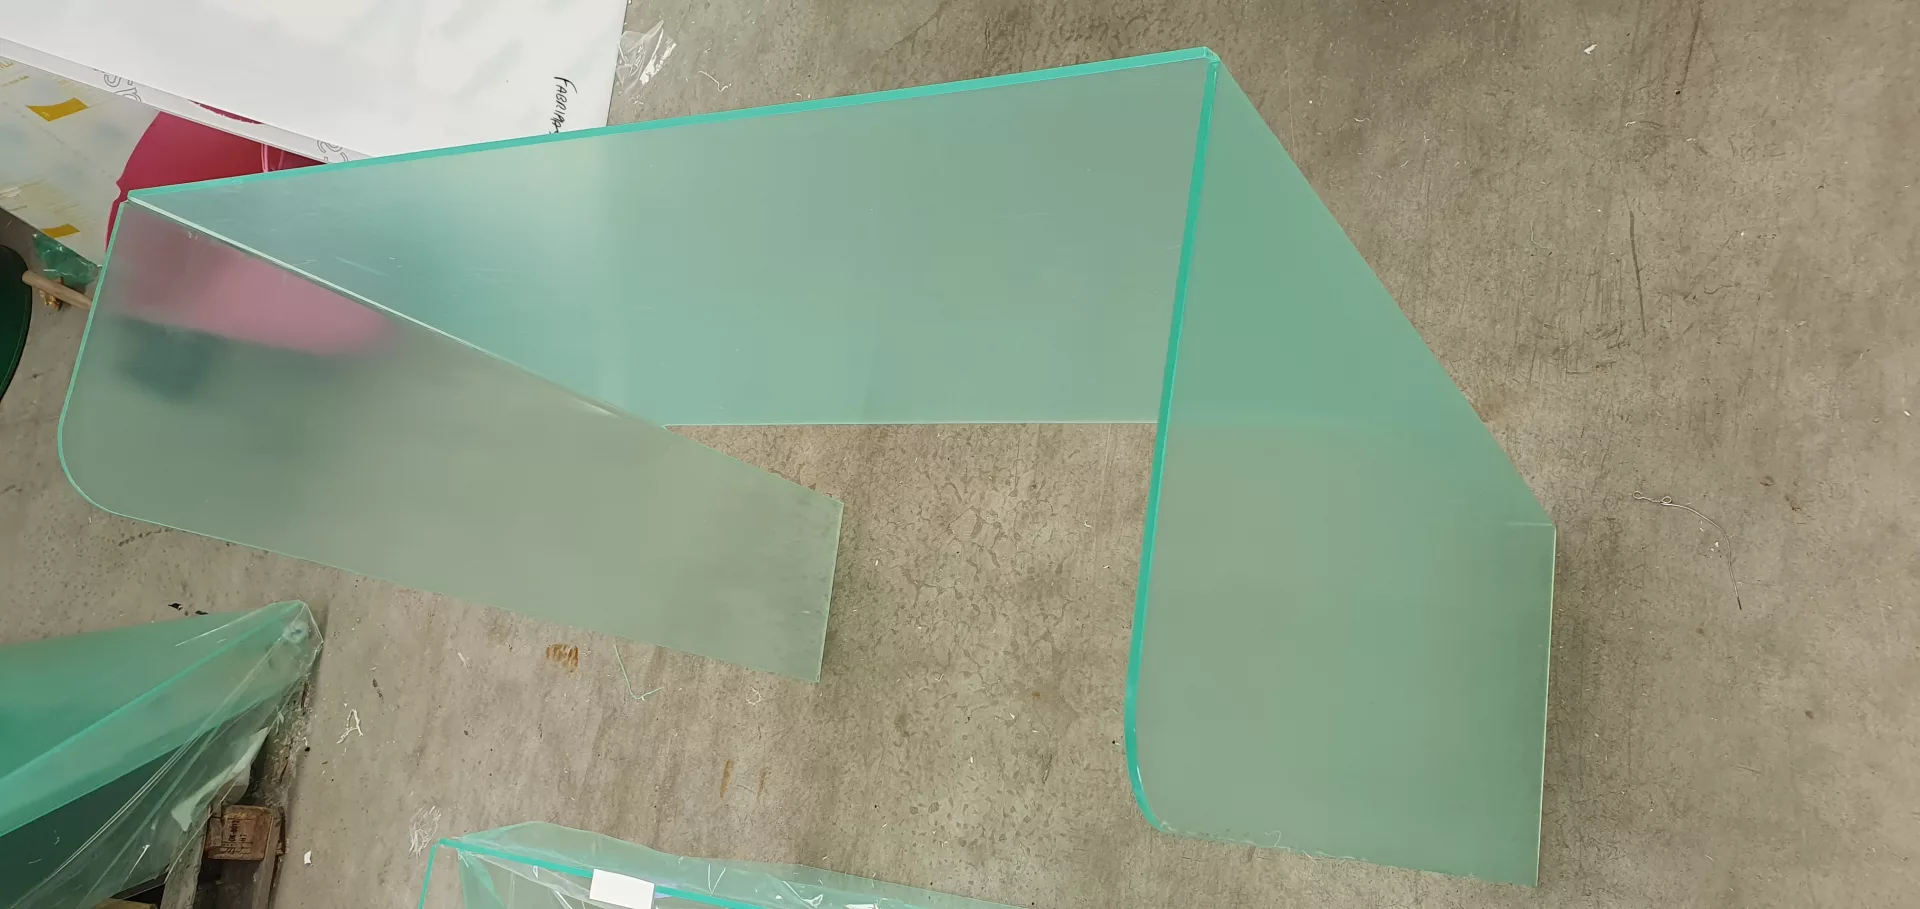 Frosted Perspex Screens, Glacier Green Frosted Perspex, Bent Acrylic Screens